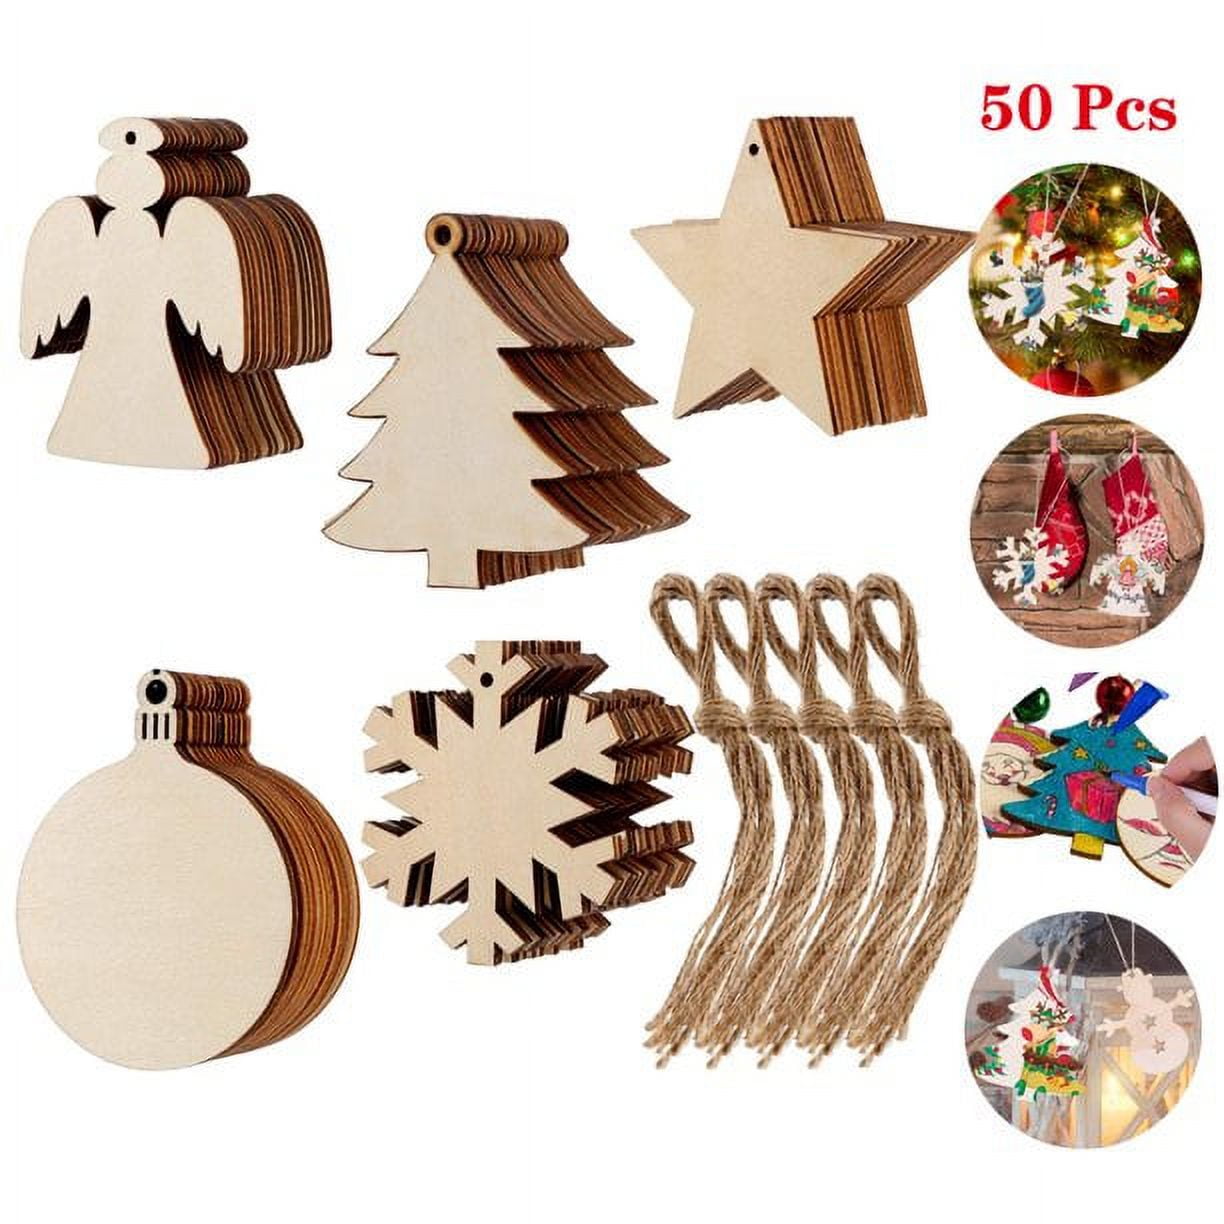 KIZZYEA 36Pcs Unfinished Wooden Christmas Ornaments Craft Kits - 12 Styles  Blank Wood Slices Ornaments for Kids to Paint, DIY Christmas Craft for Xmas